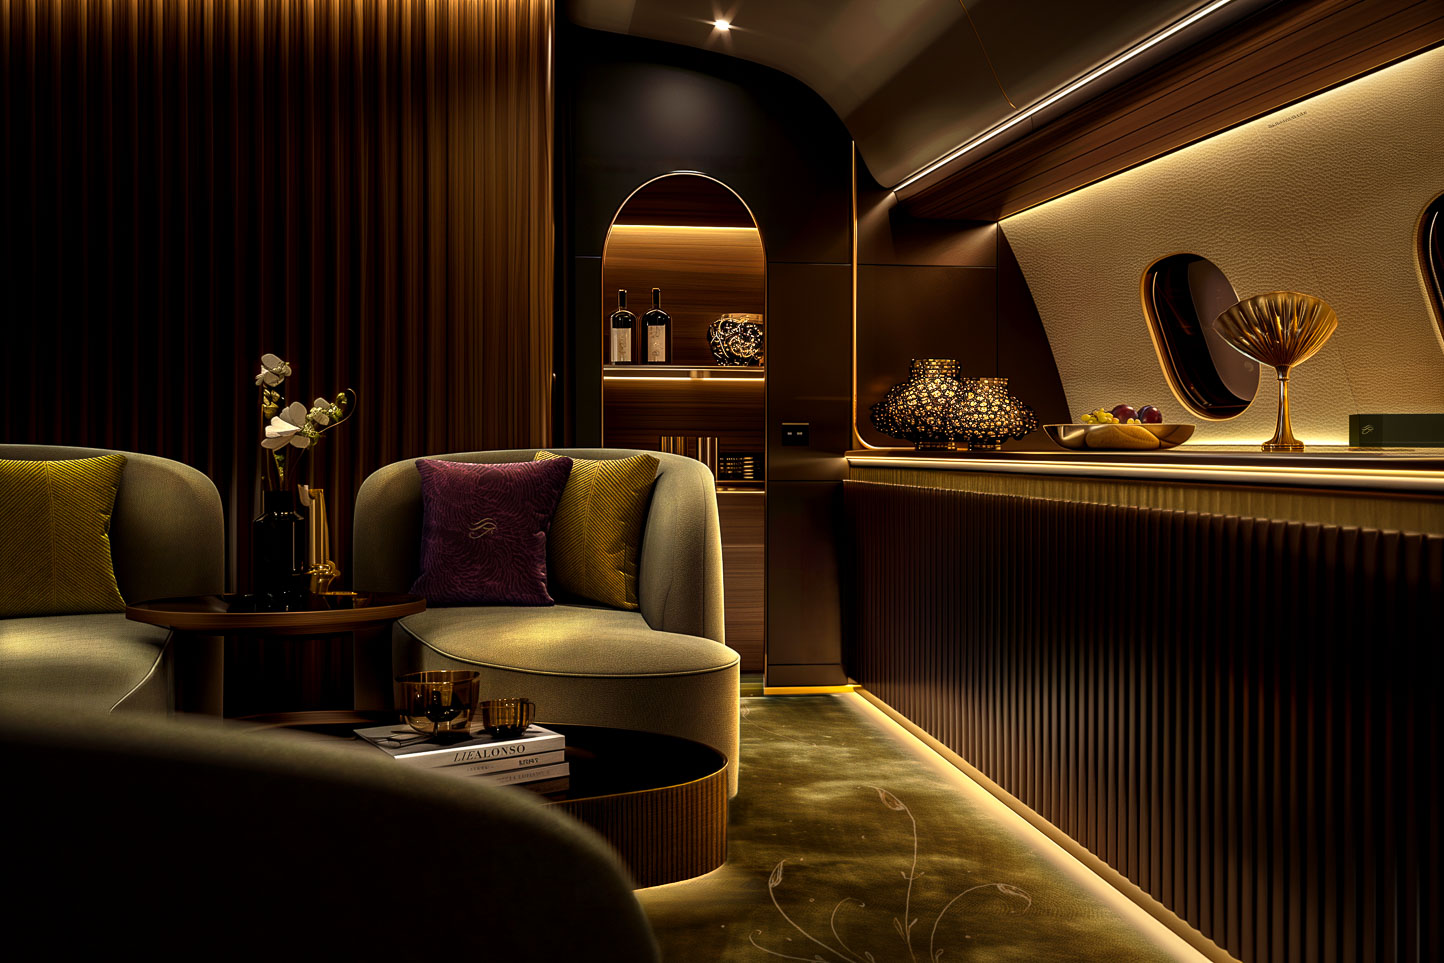 Lie Alonso Dynasty - Private Jet Luxury Interior Design - Exoticism and the Ancient Future